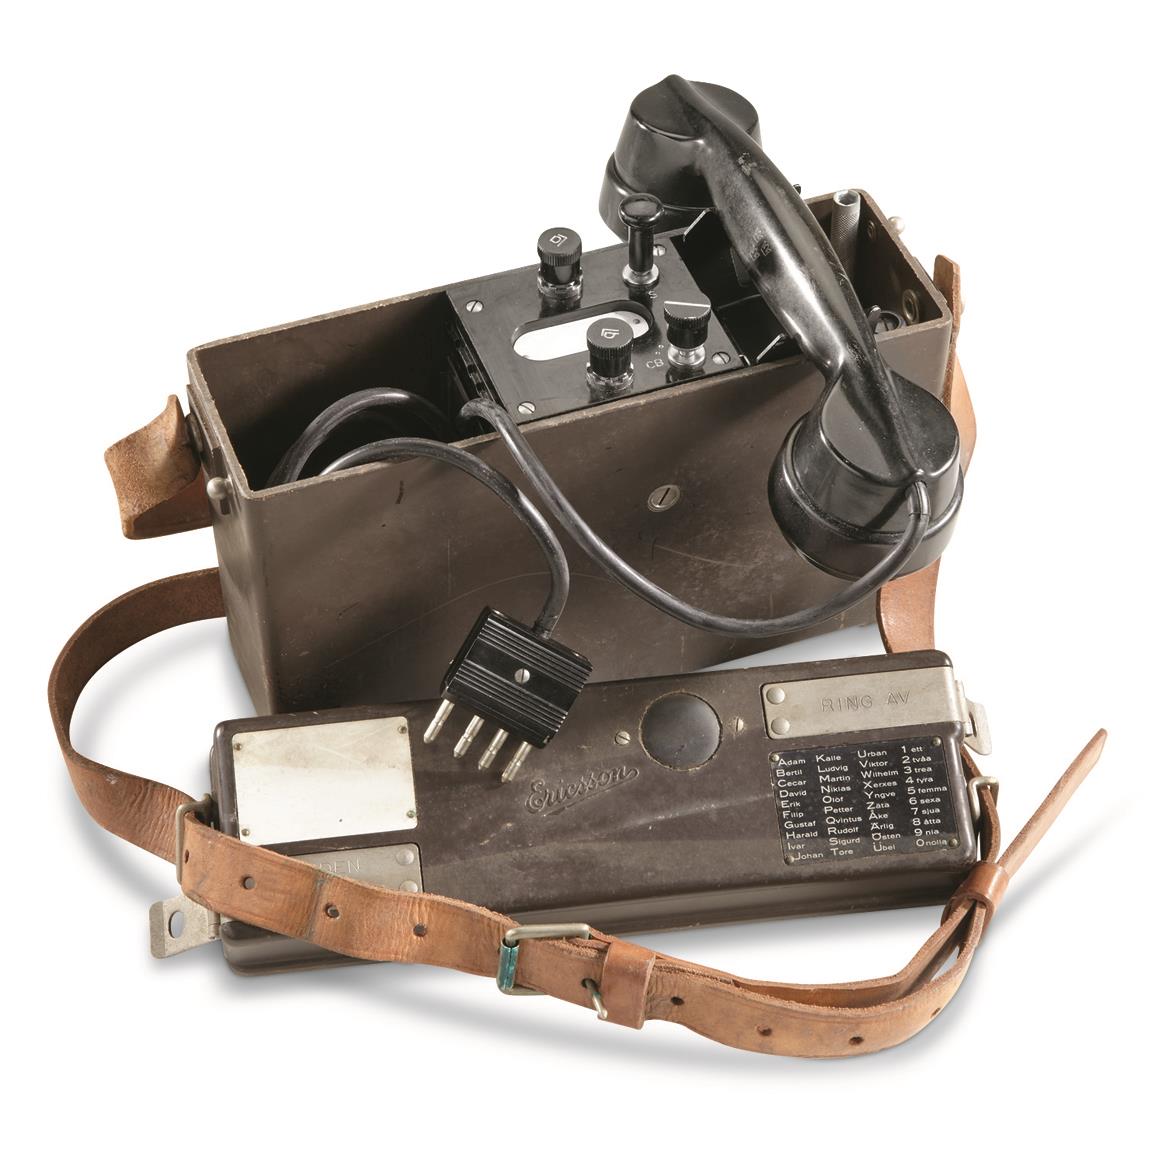 Rugged carry case with leather shoulder strap